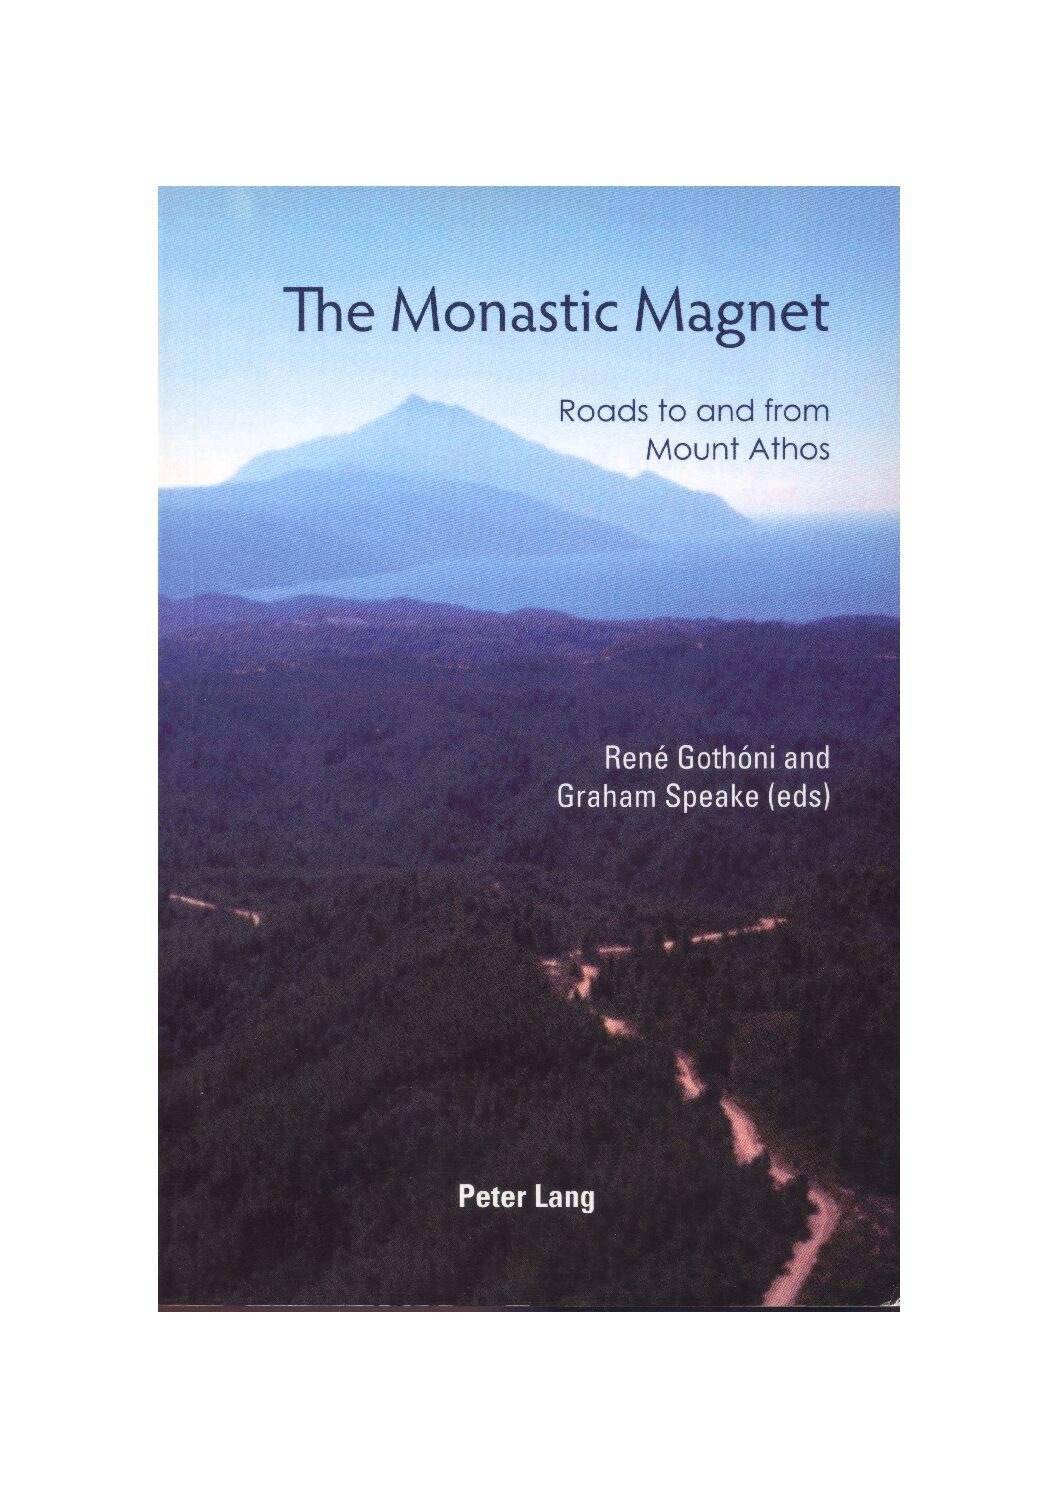 The Monastic Magnet Roads to and from Mount Athos